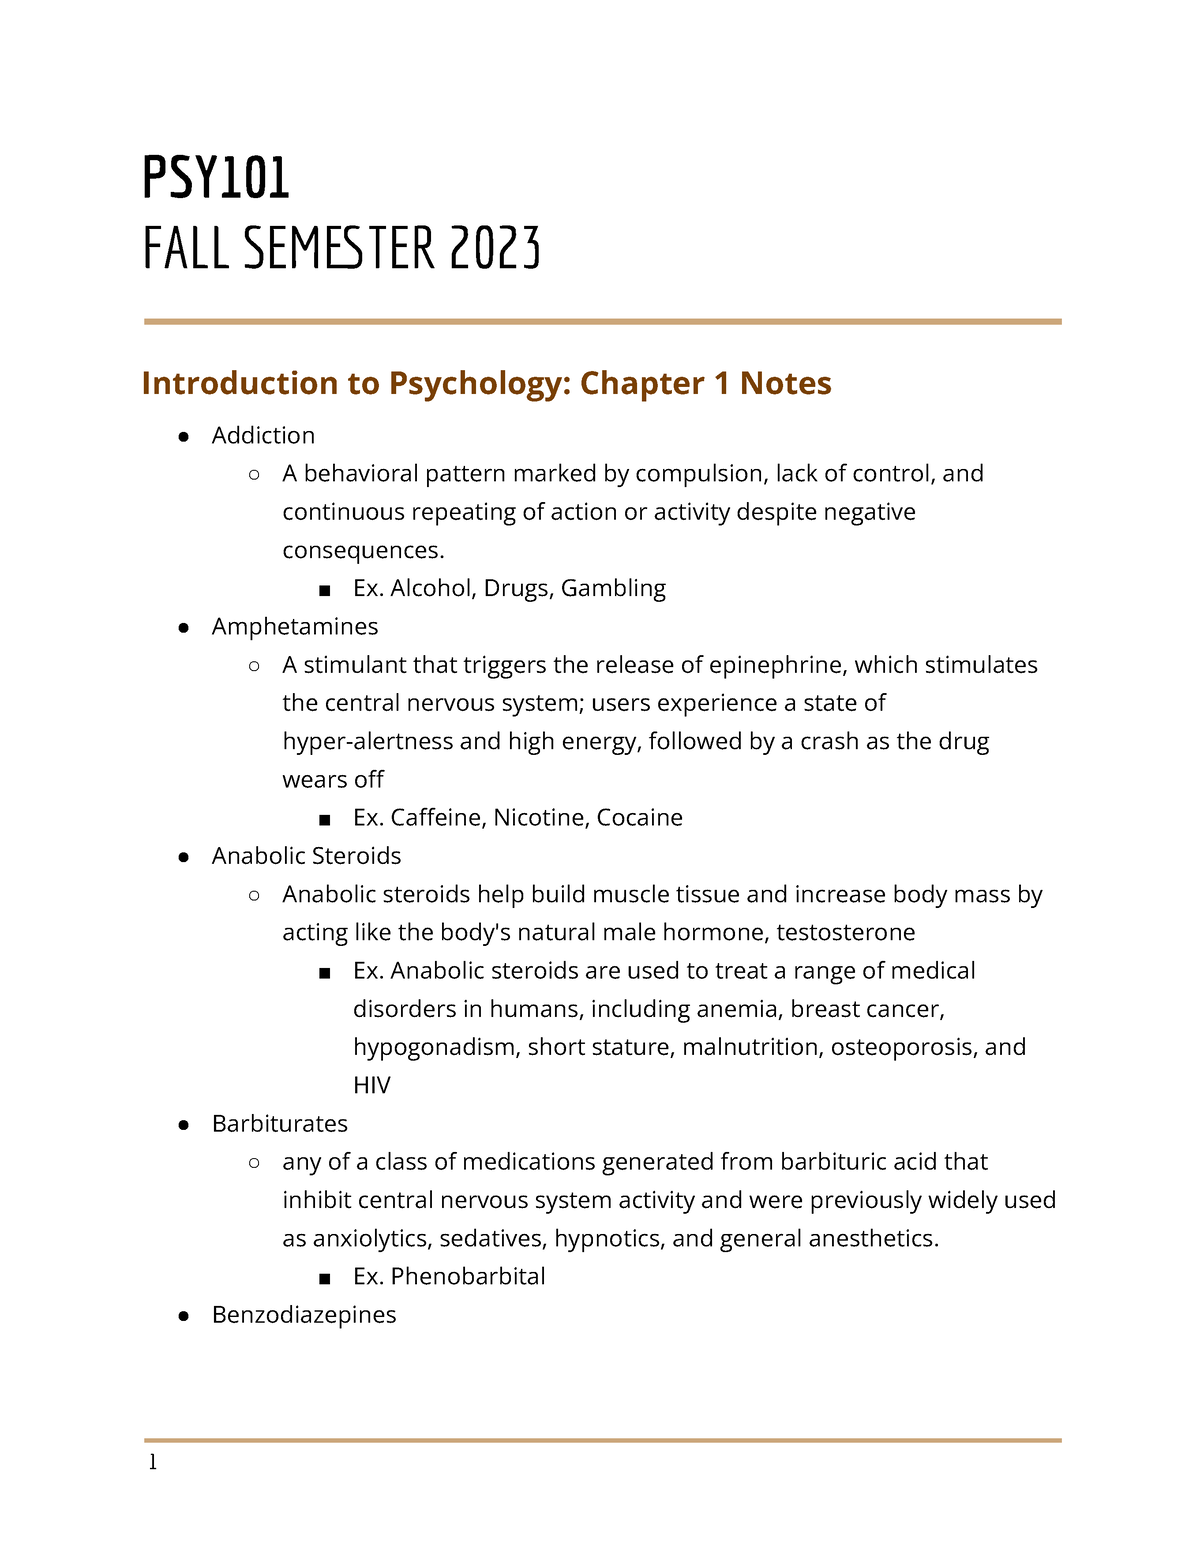 Introduction To Psychology Chapter 1 Notes 2 Psy Fall Semter 2023 Introduction To Psychology 